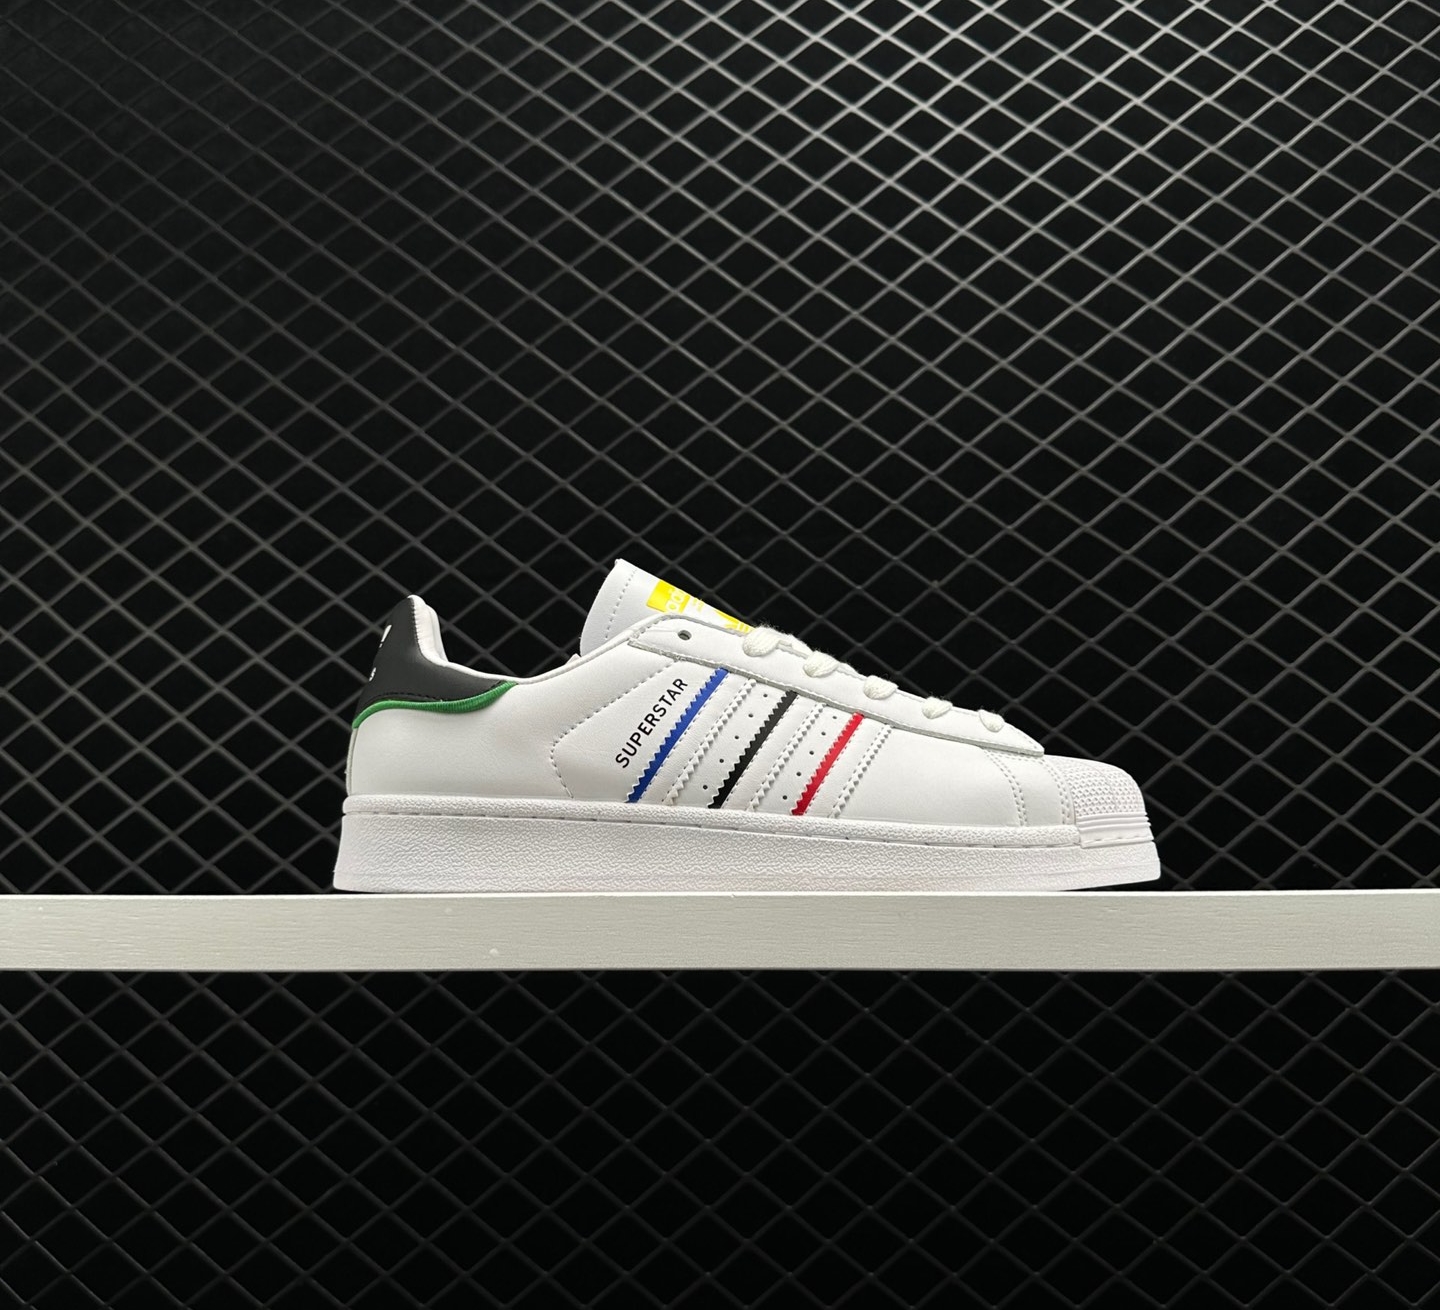 Adidas Superstar 'Olympic Pack' FY2325 - Sleek and Stylish Athletic Sneakers